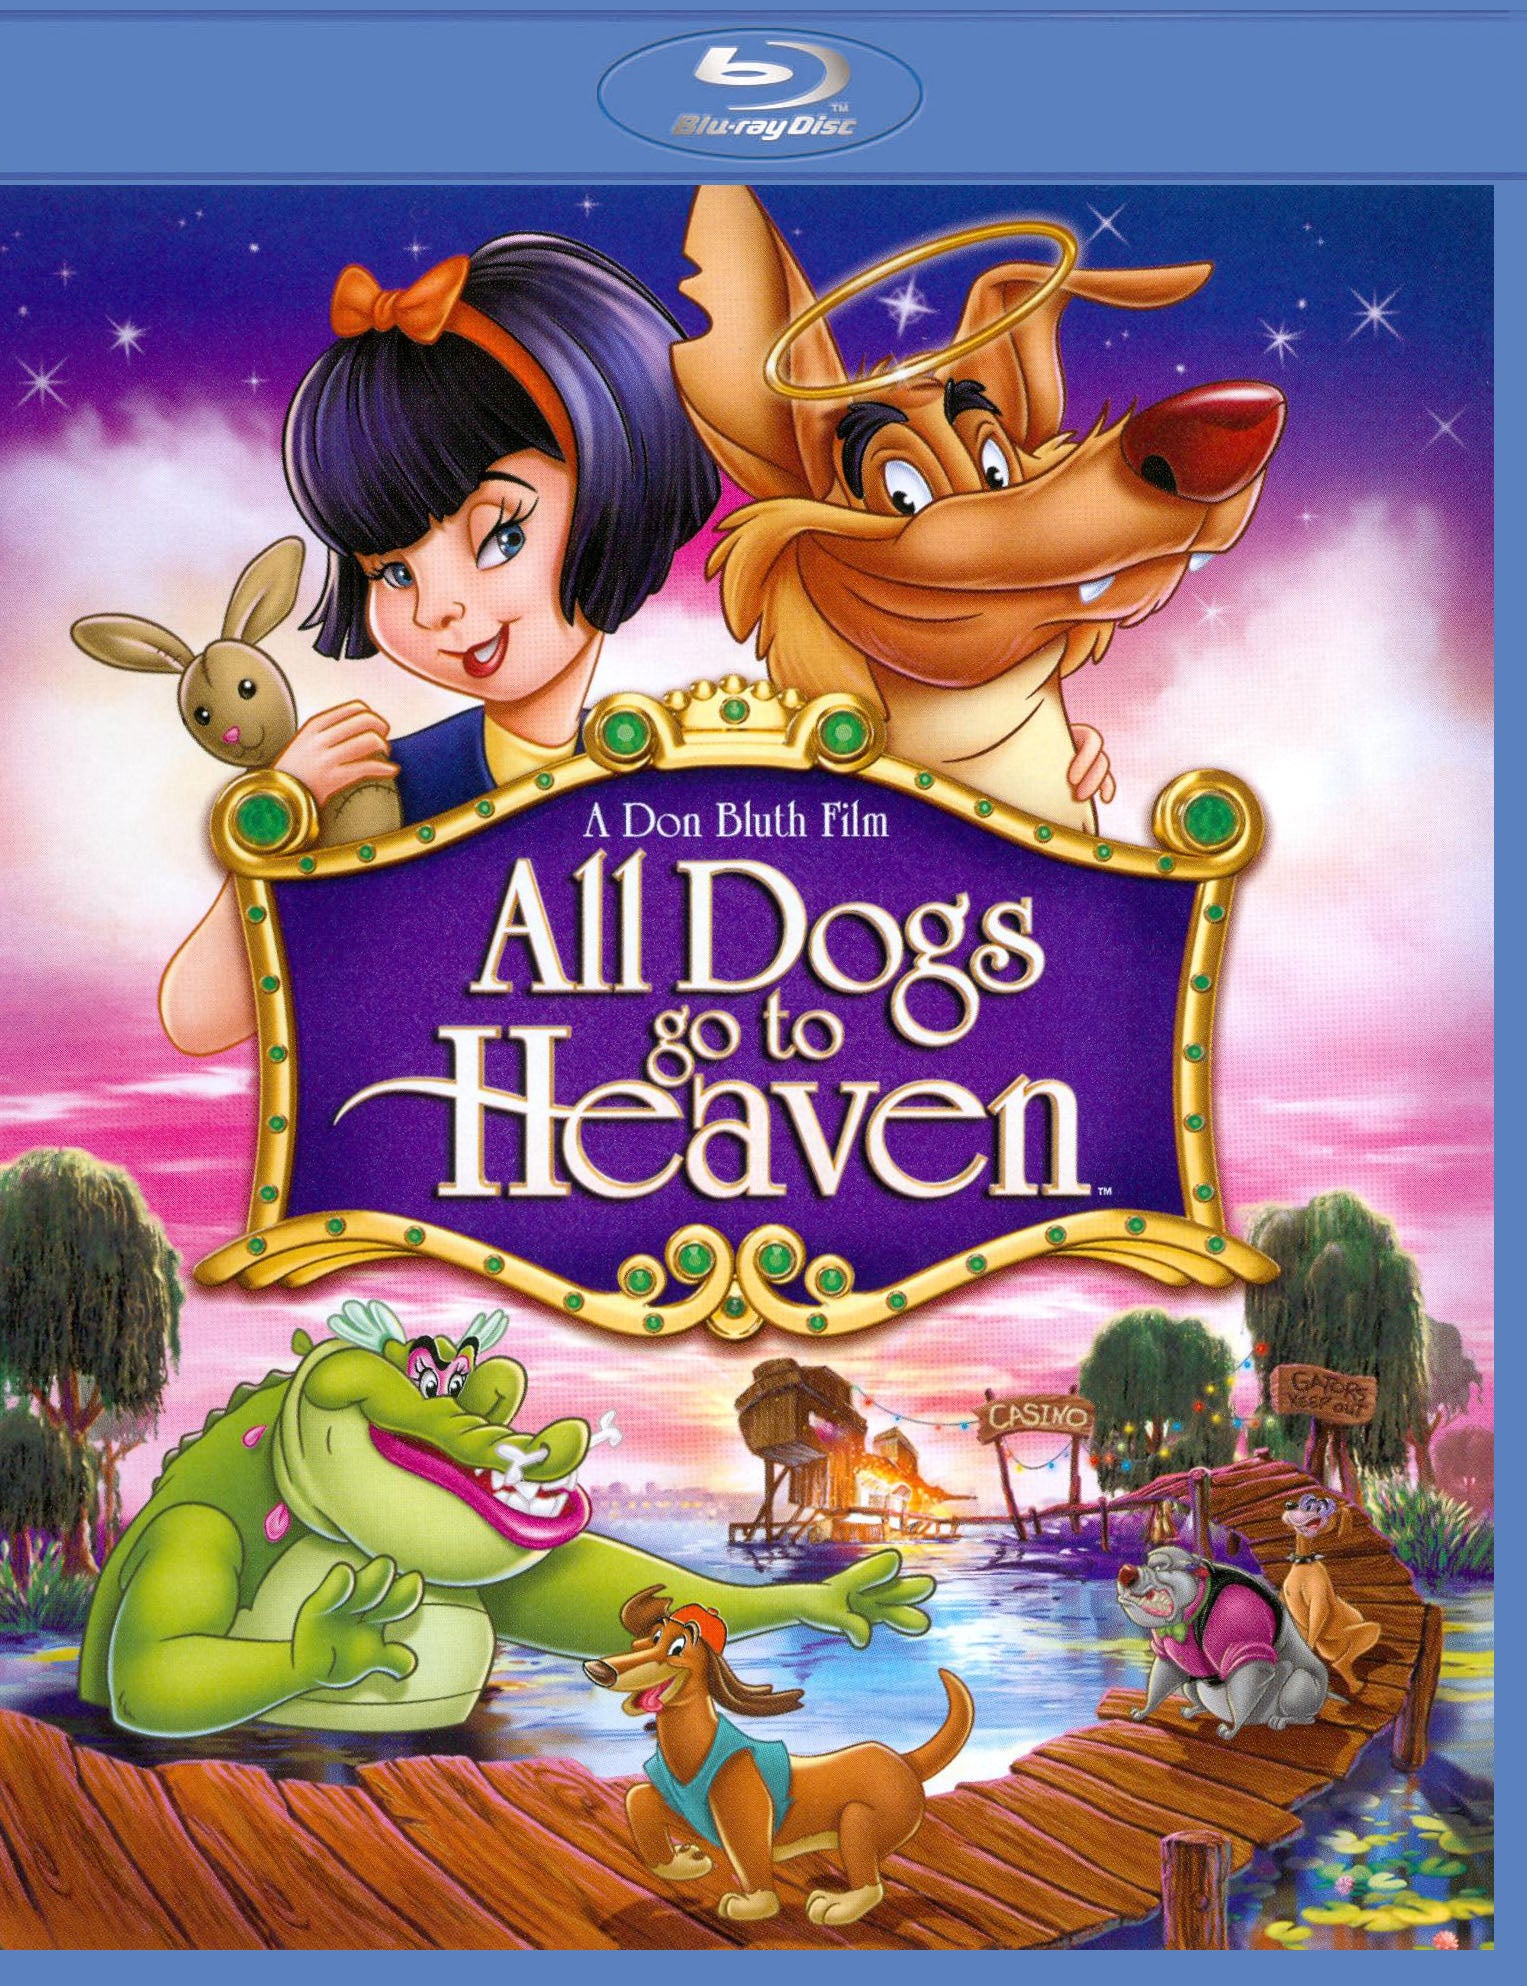 All Dogs Go to Heaven [Blu-ray] cover art